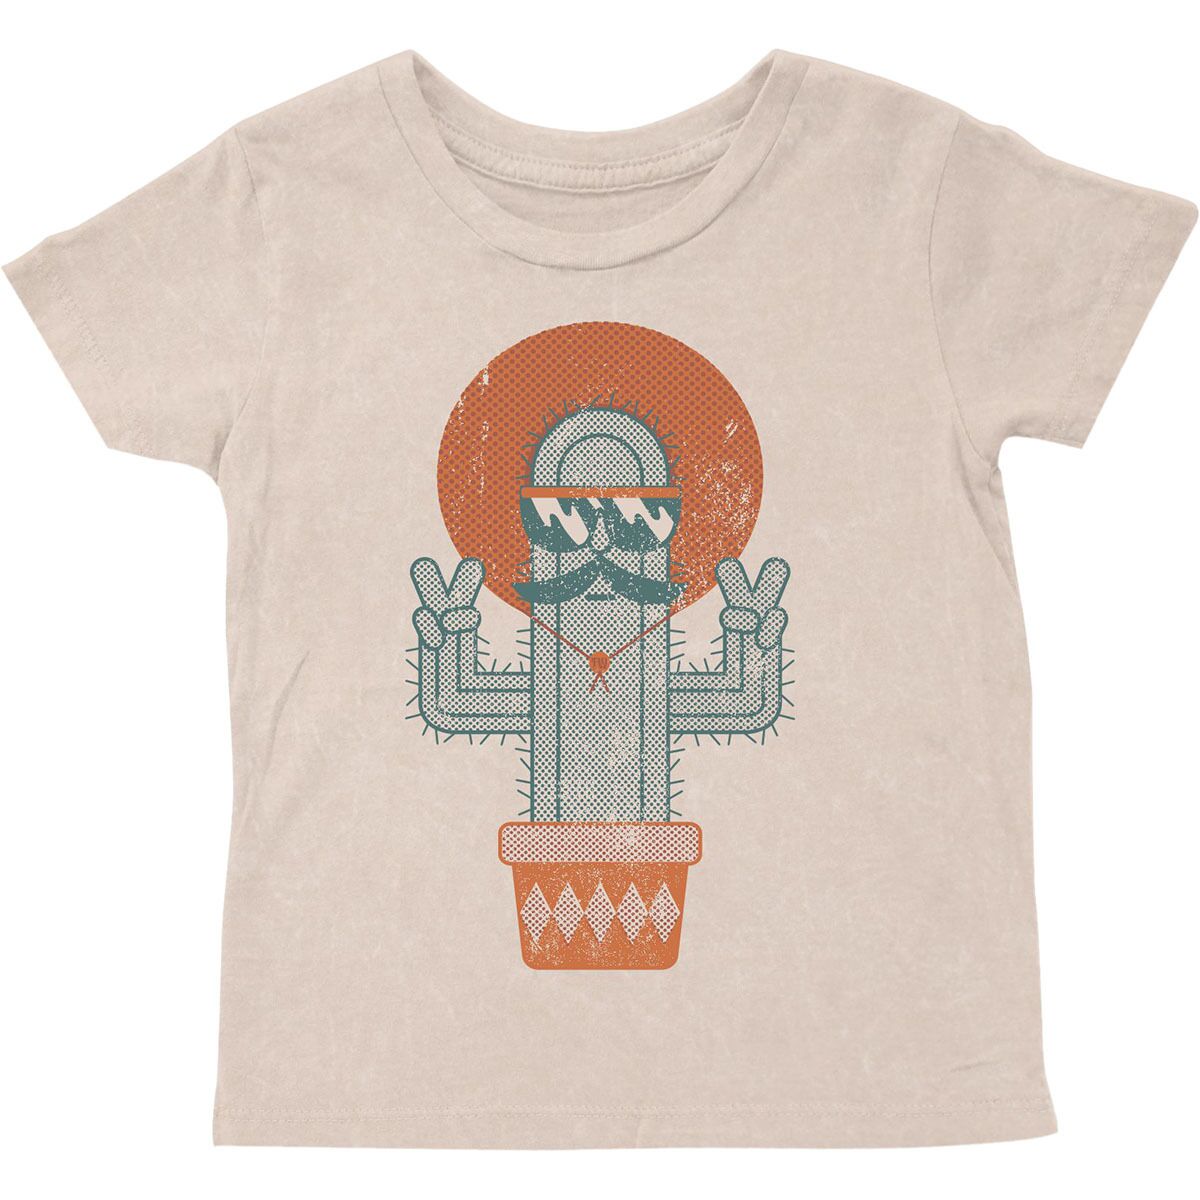 Tiny Whales Cool Cactus T-Shirt - Toddlers'